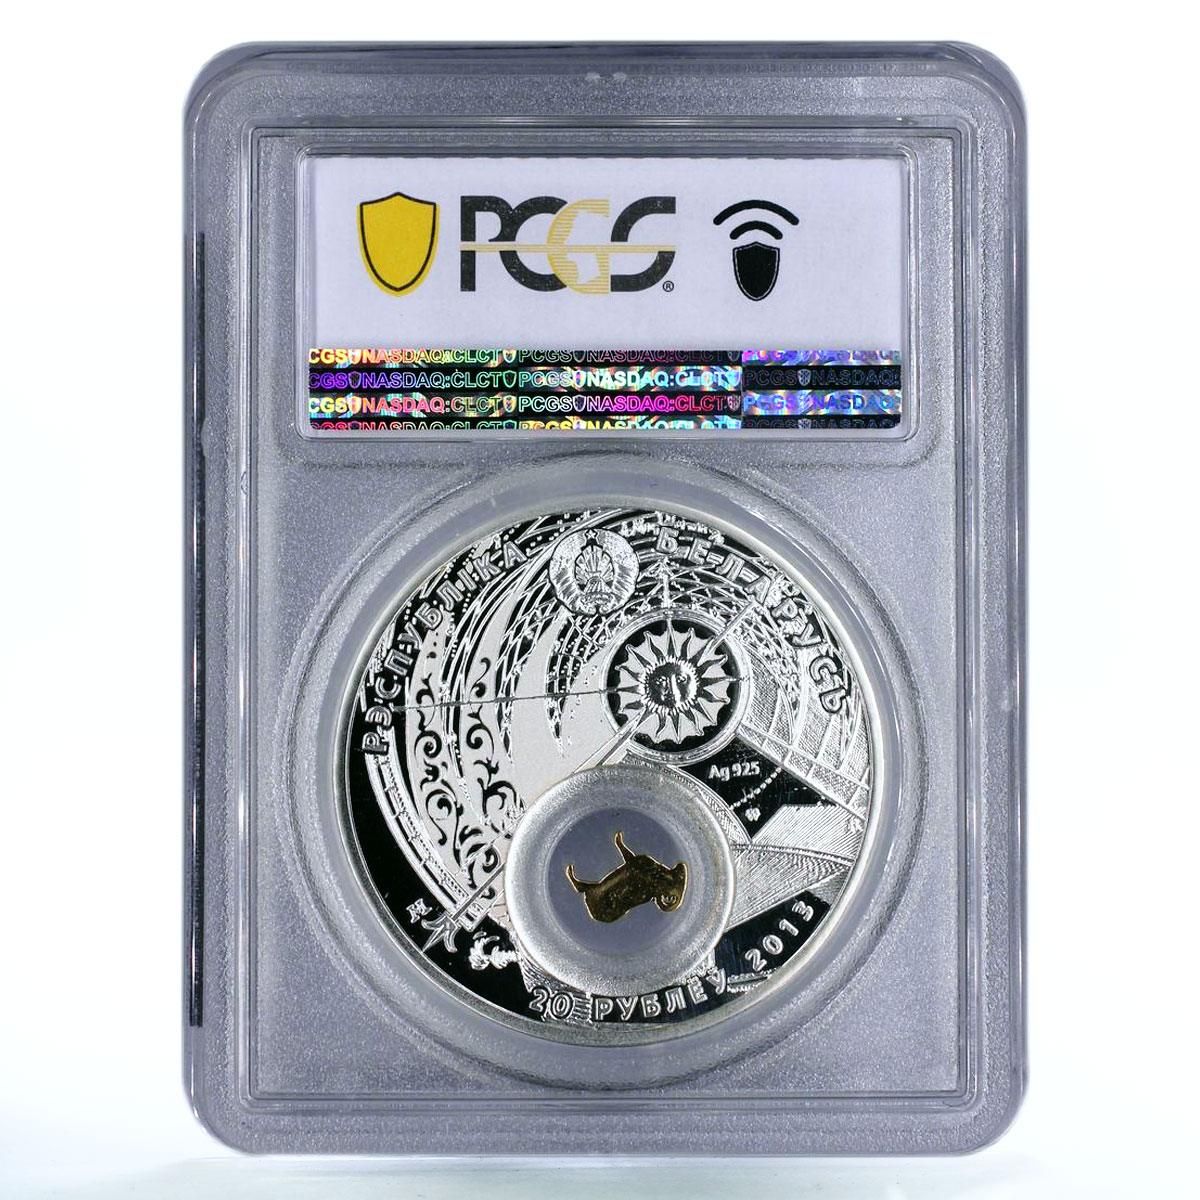 Belarus 20 rubles Zodiac Signs series Aries PR69 PCGS gilded silver coin 2013